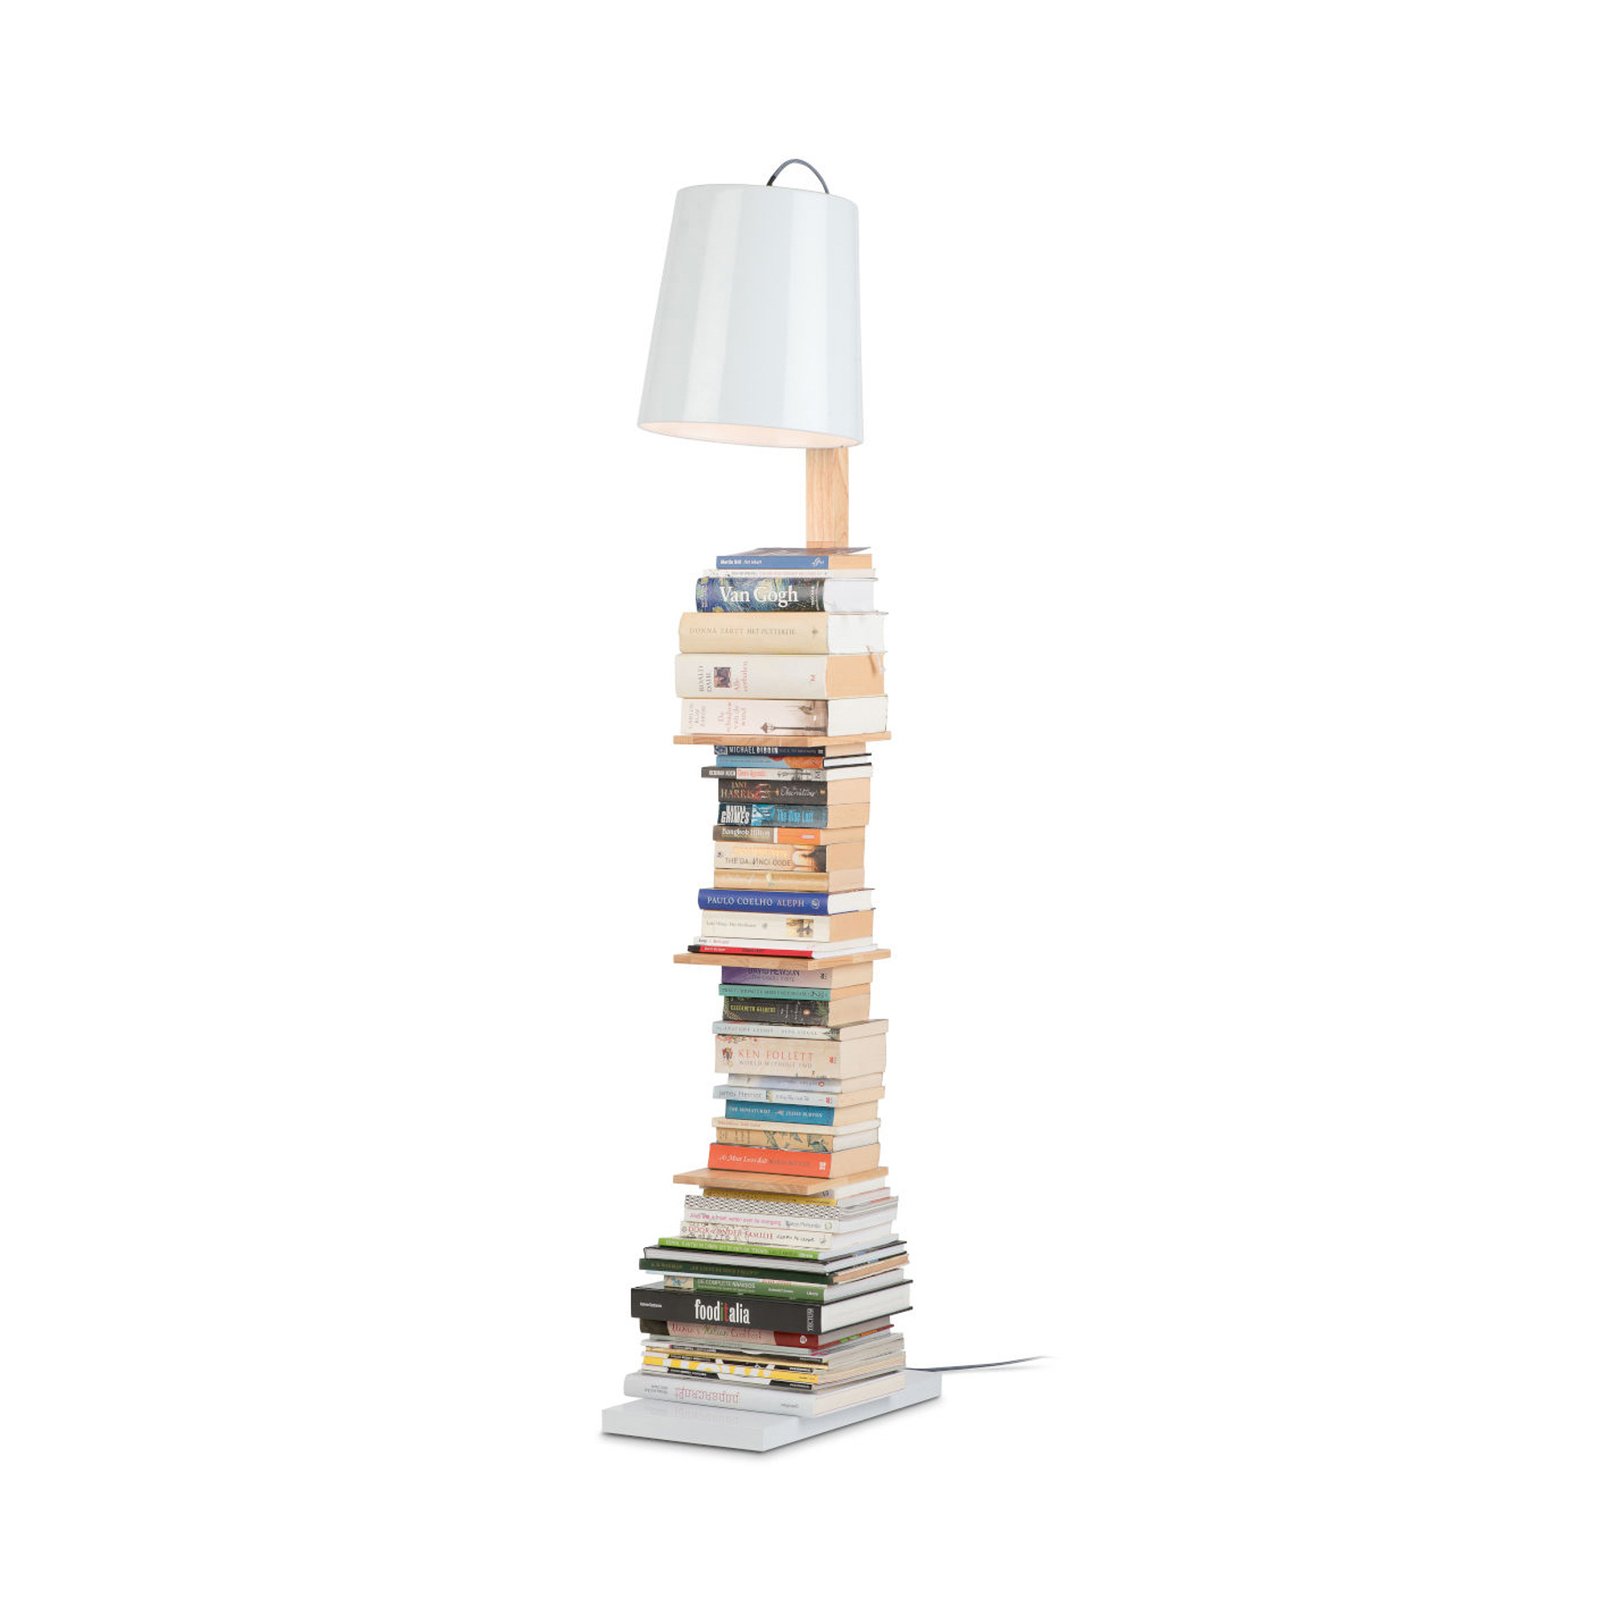 It's about RoMi Cambridge vloerlamp, hout/wit